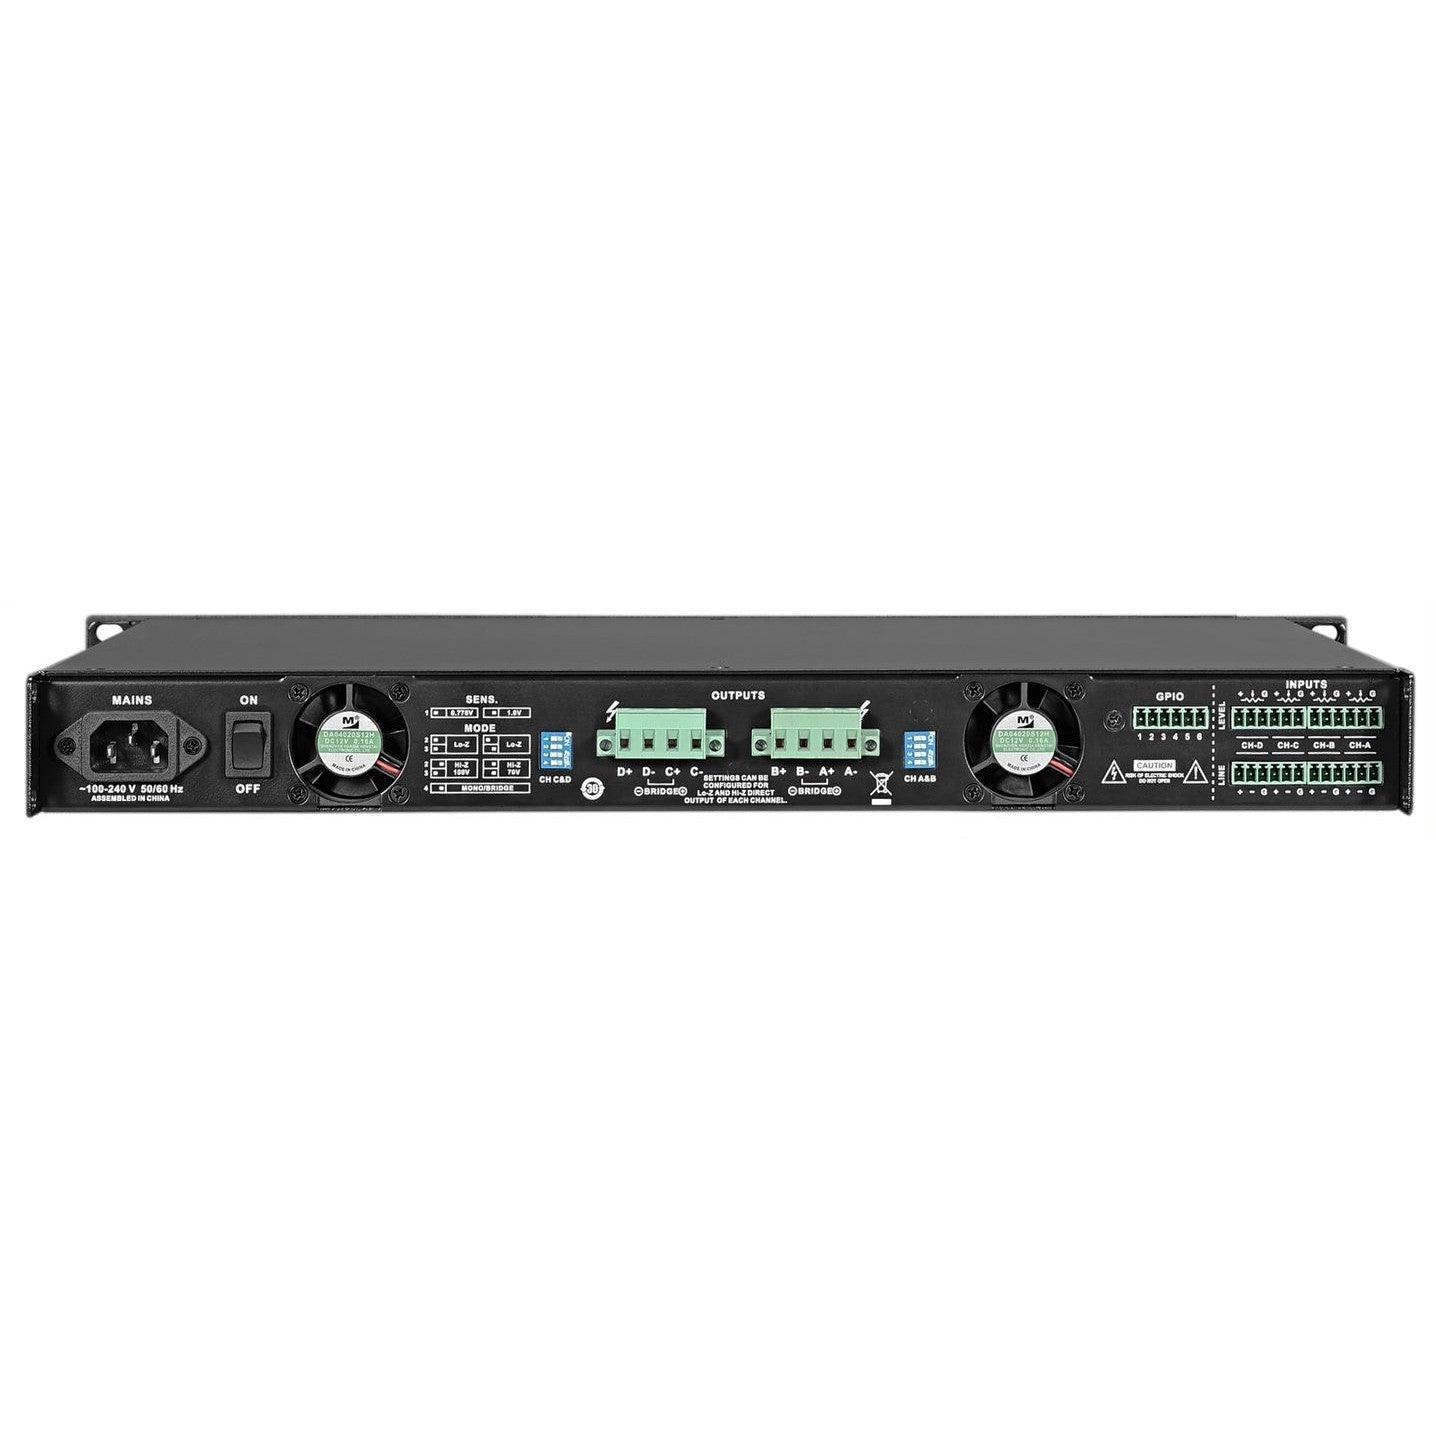 Wharfedale Pro DP4035i Power Amplifier 4x1012W @ 2Ohm with Hardware Features for Installation